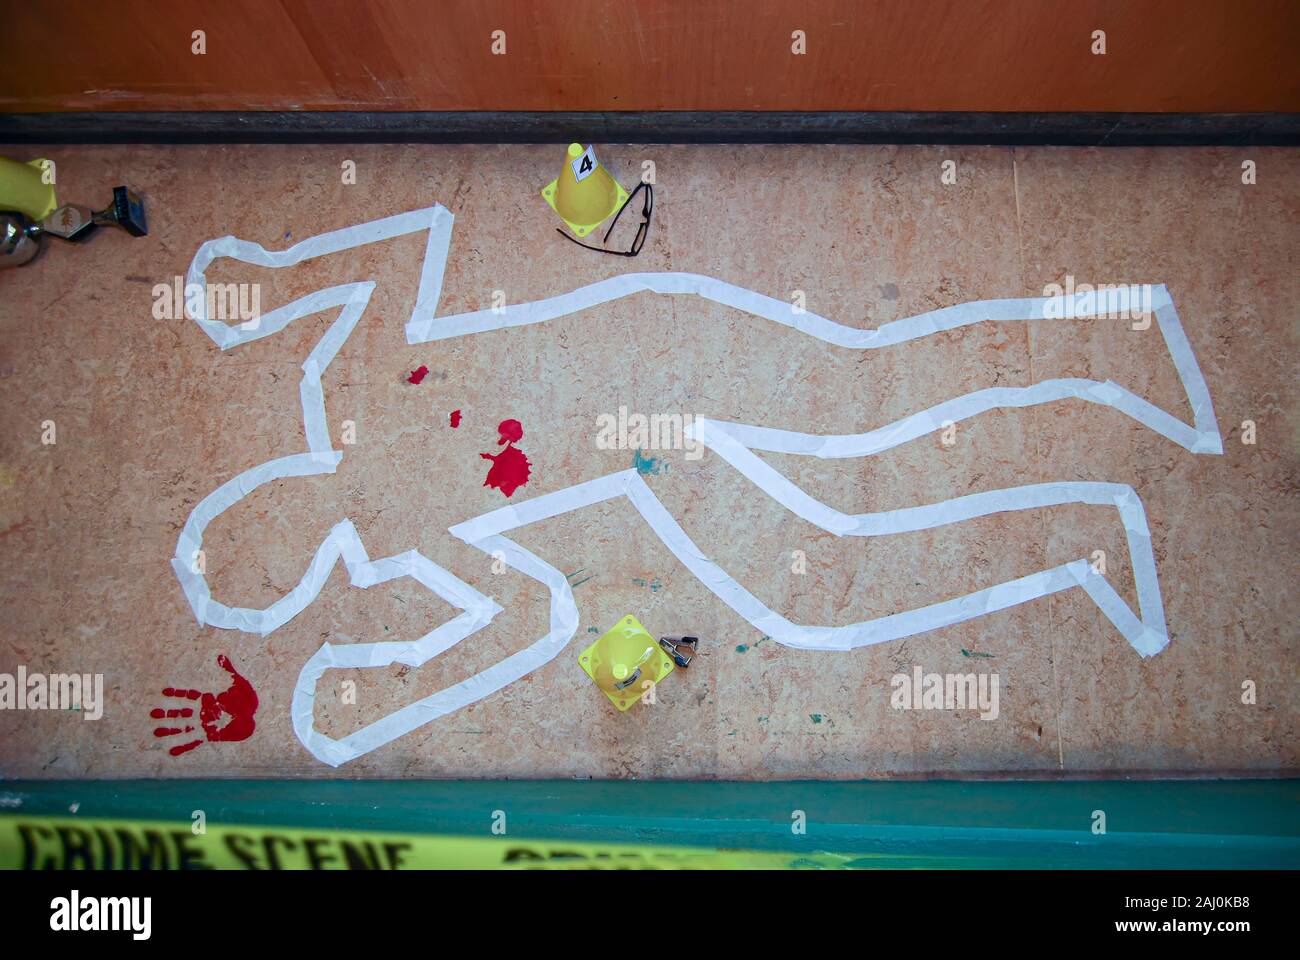 Concept and fictive view of the crime scene secured by the police during the investigation identified evidences by number and cones Stock Photo